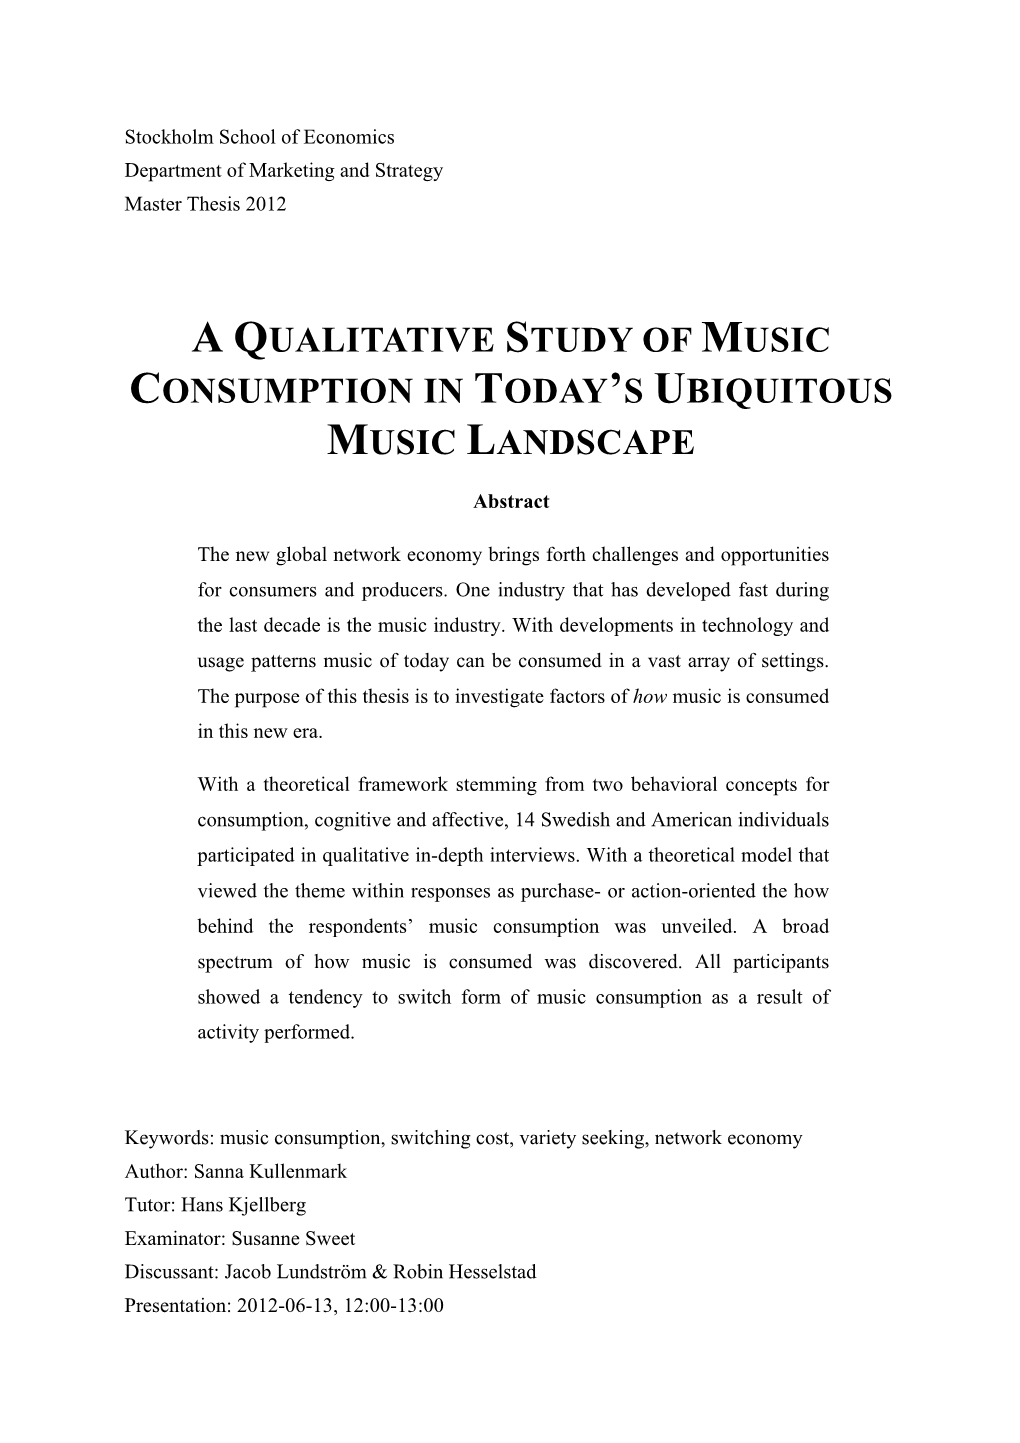 A Qualitative Study of Music Consumption in Today's